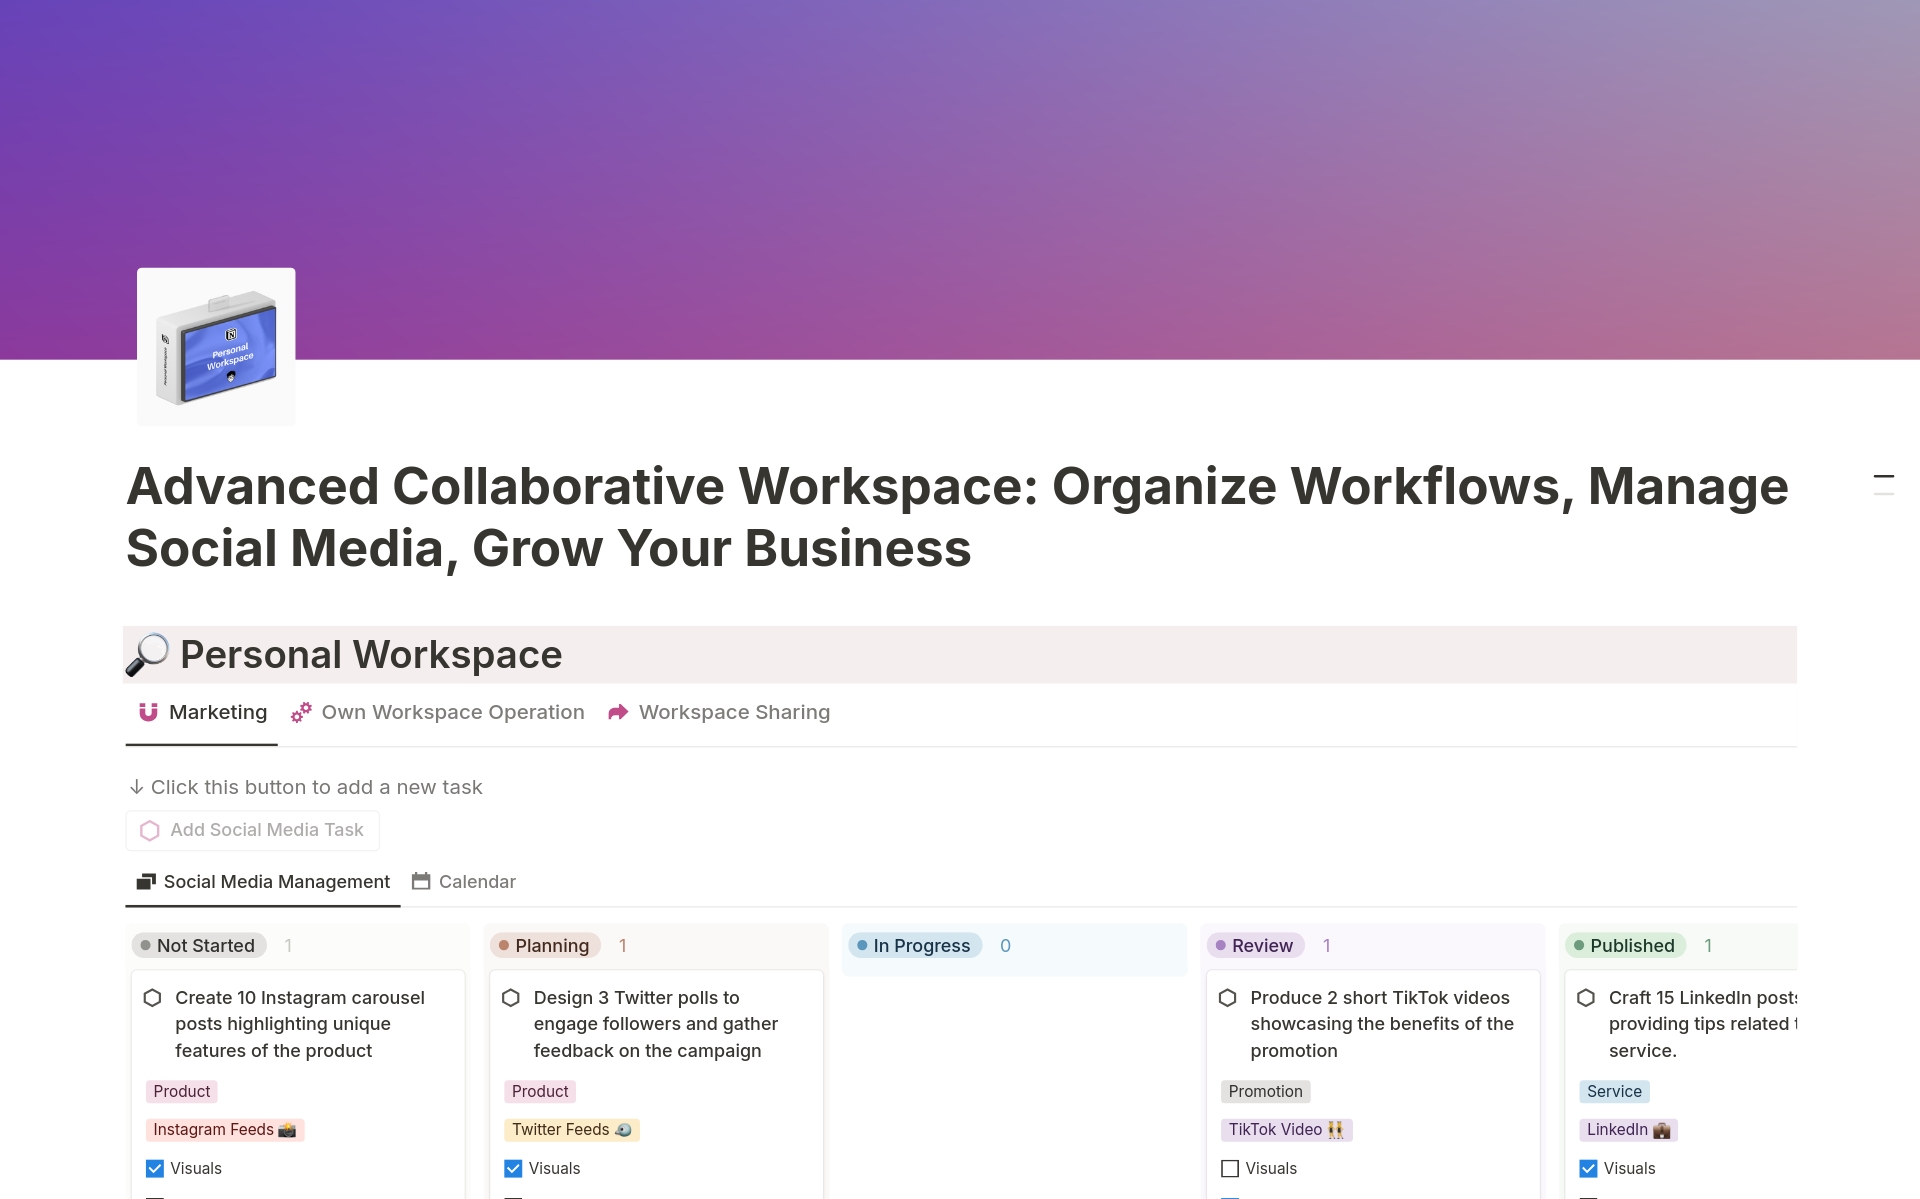 Organized workflows, effective social media management, and seamless team collaboration.
✓ Marketing: Plan, schedule, track social media campaigns
✓ Own Workspace Operation: Manage personal and business tasks
✓ Workspace Sharing: Collaborate while maintaining control